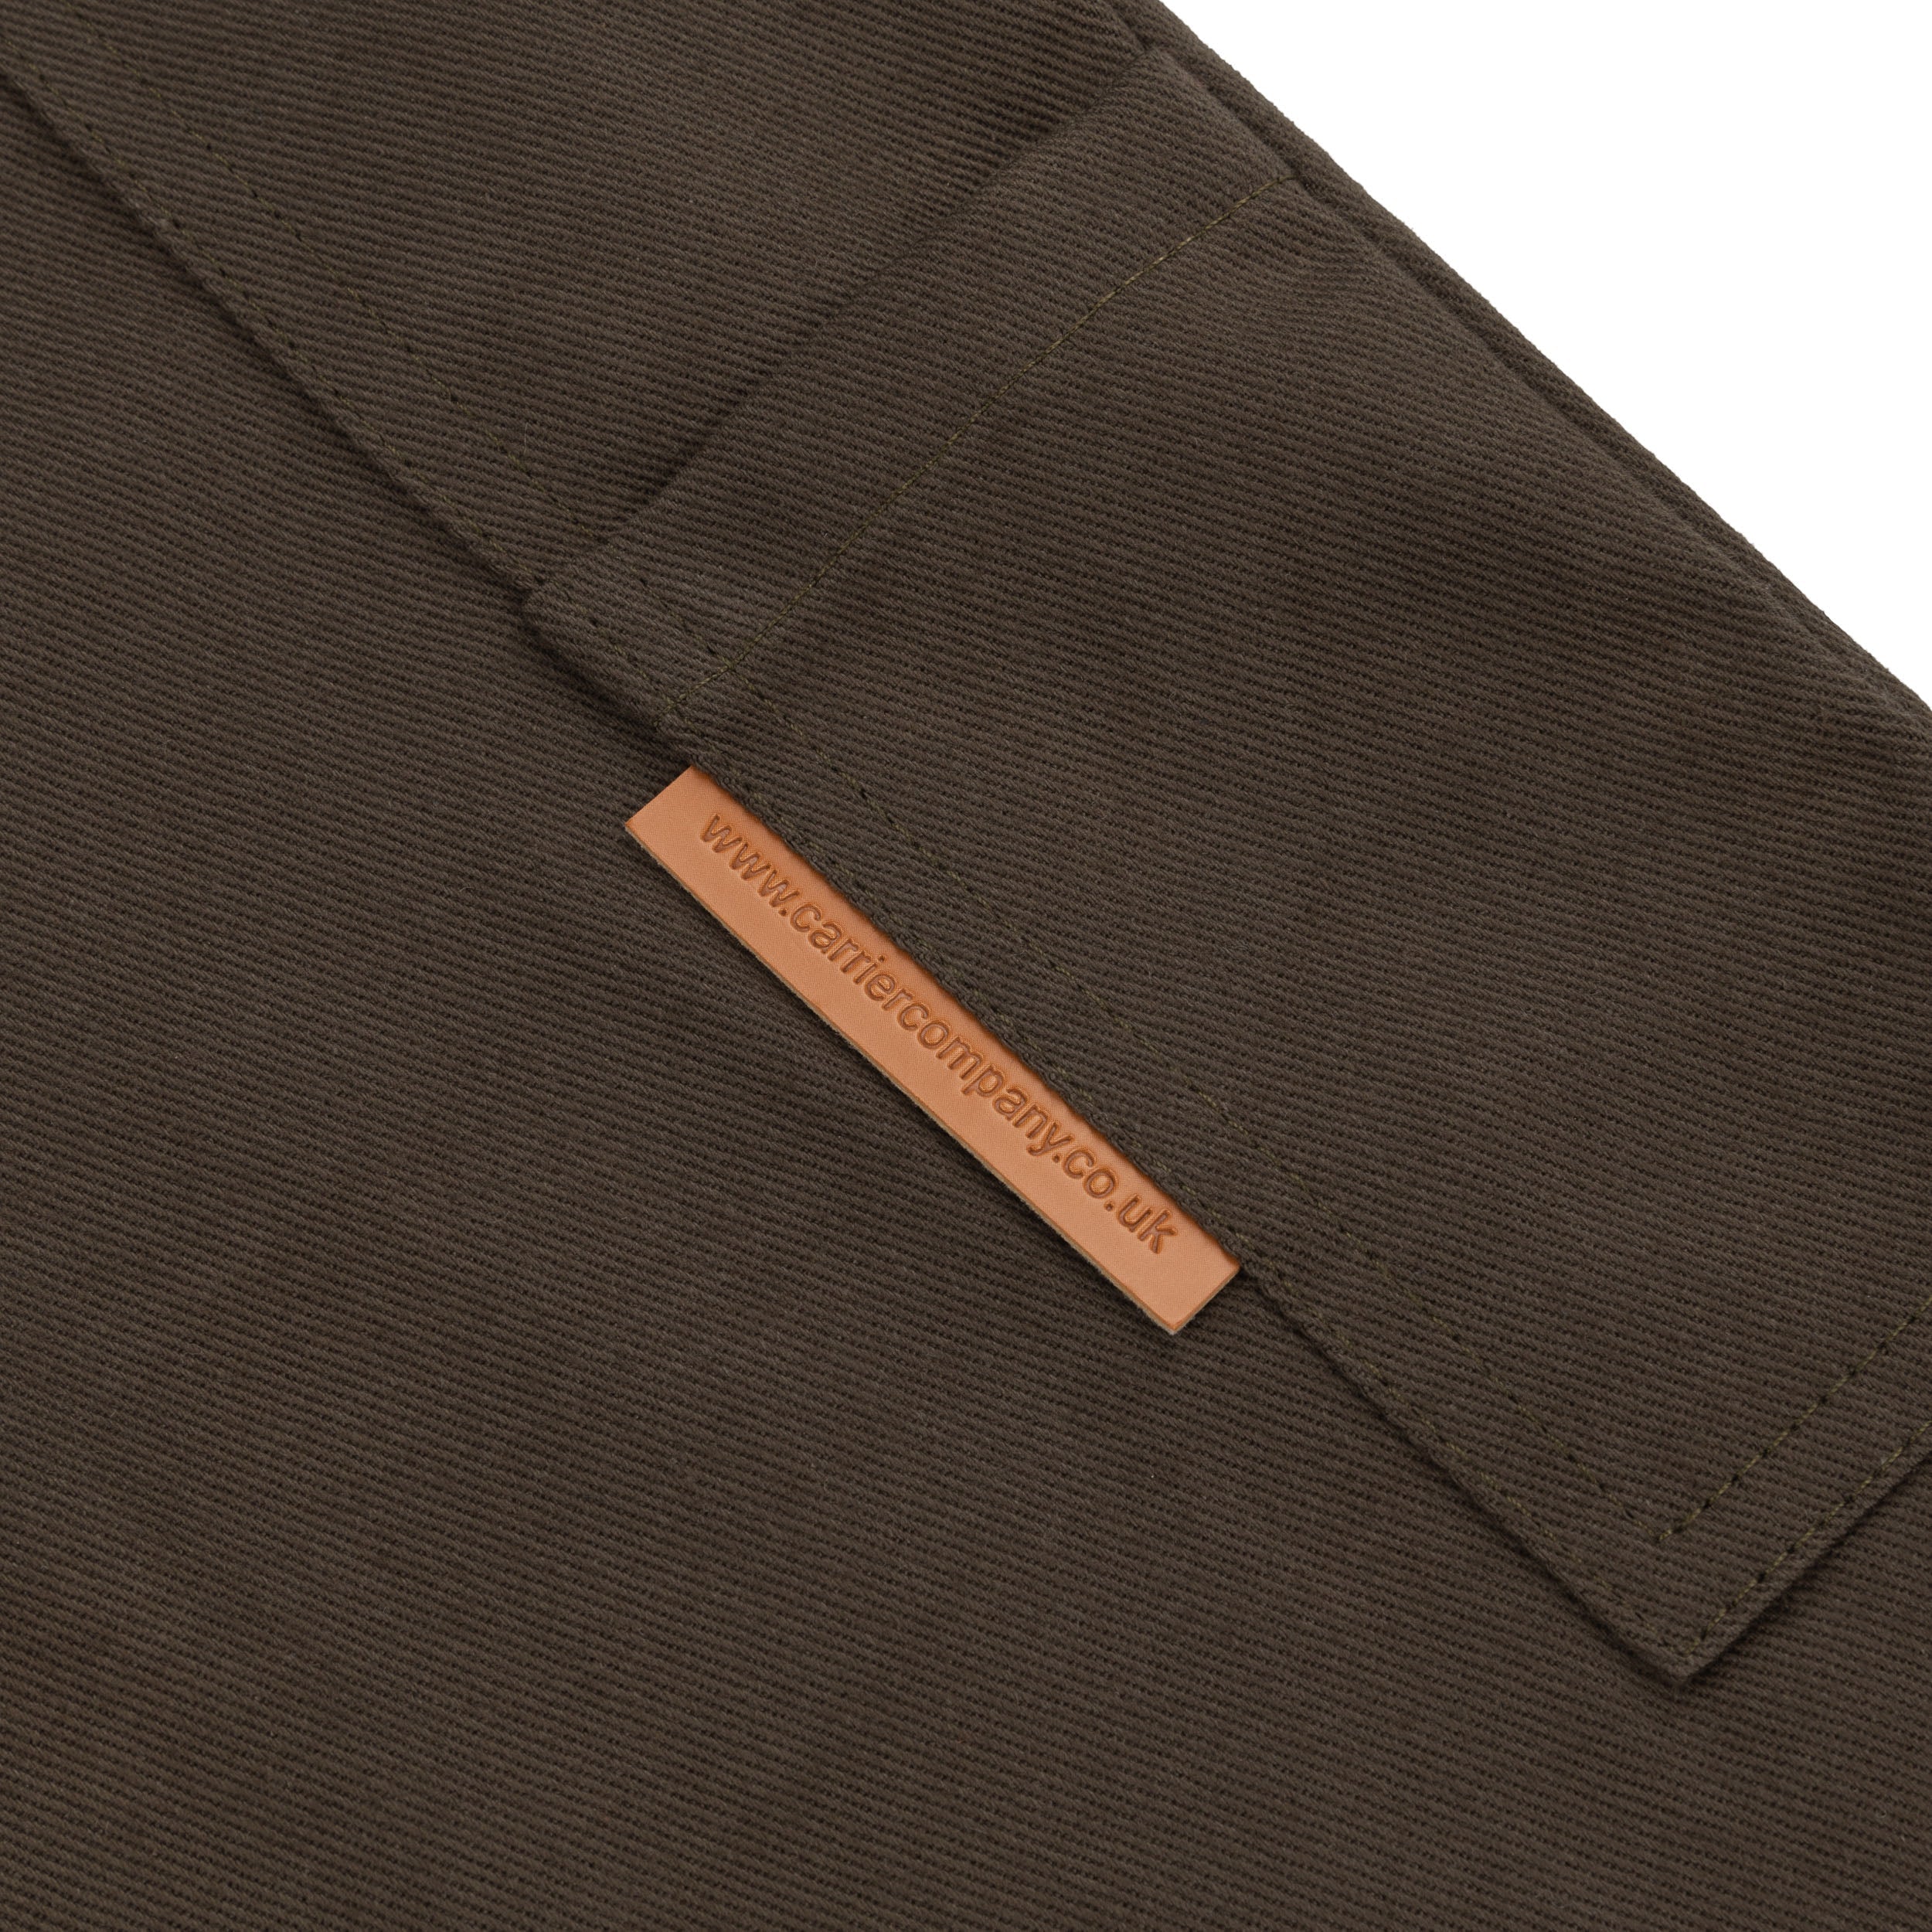 Close up of the pocket detail on the Carrier Company Men's Dungarees in Olive